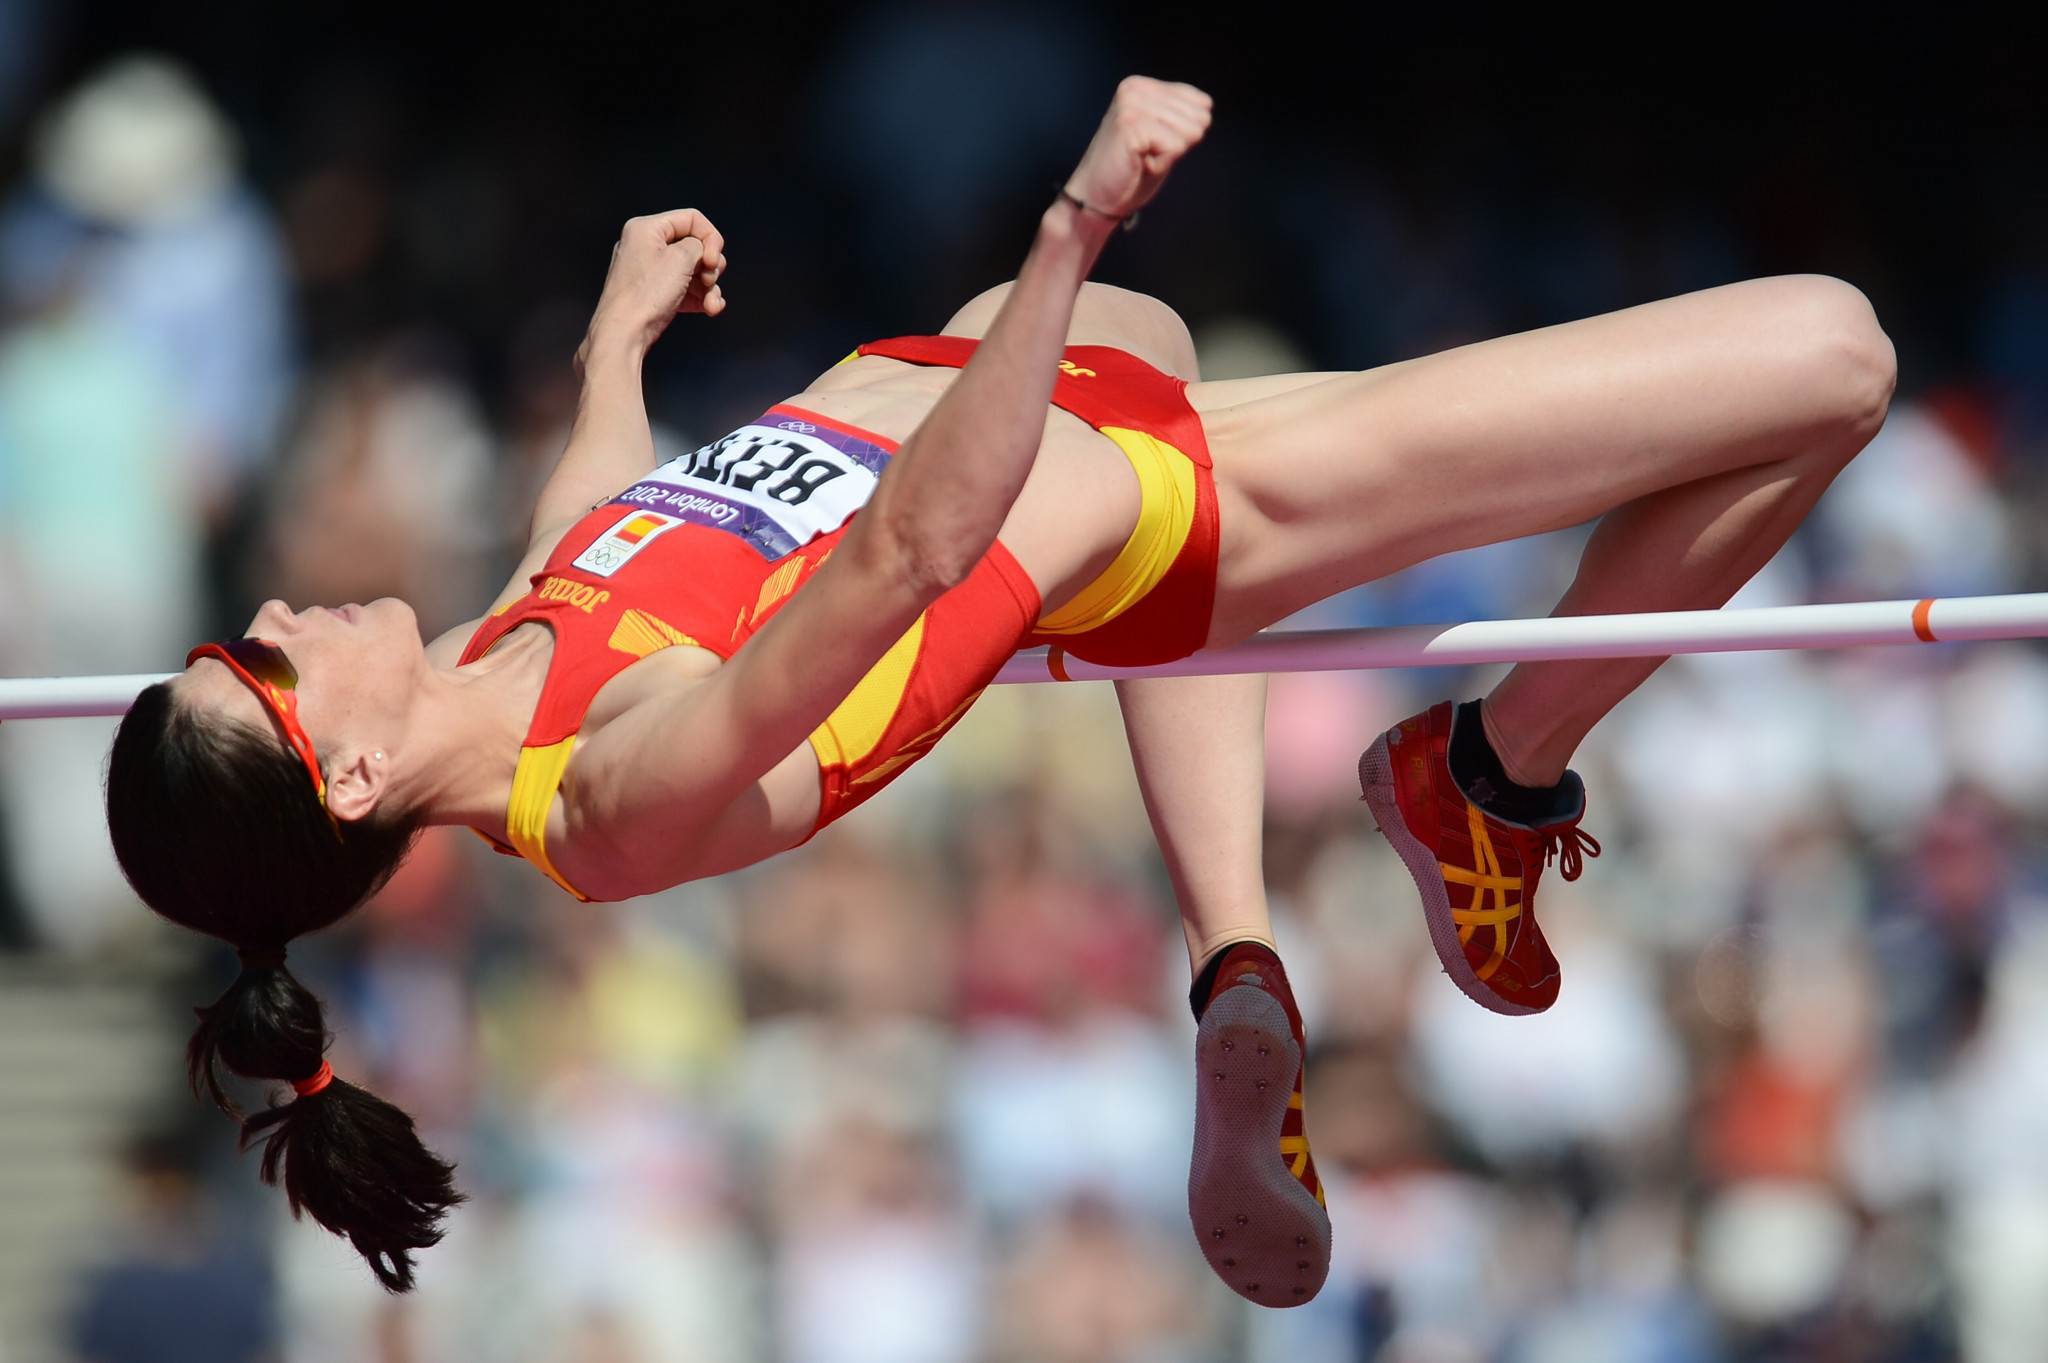 Ruth Beitia will receive the women's high jump bronze medal from London 2012 ©Getty Images